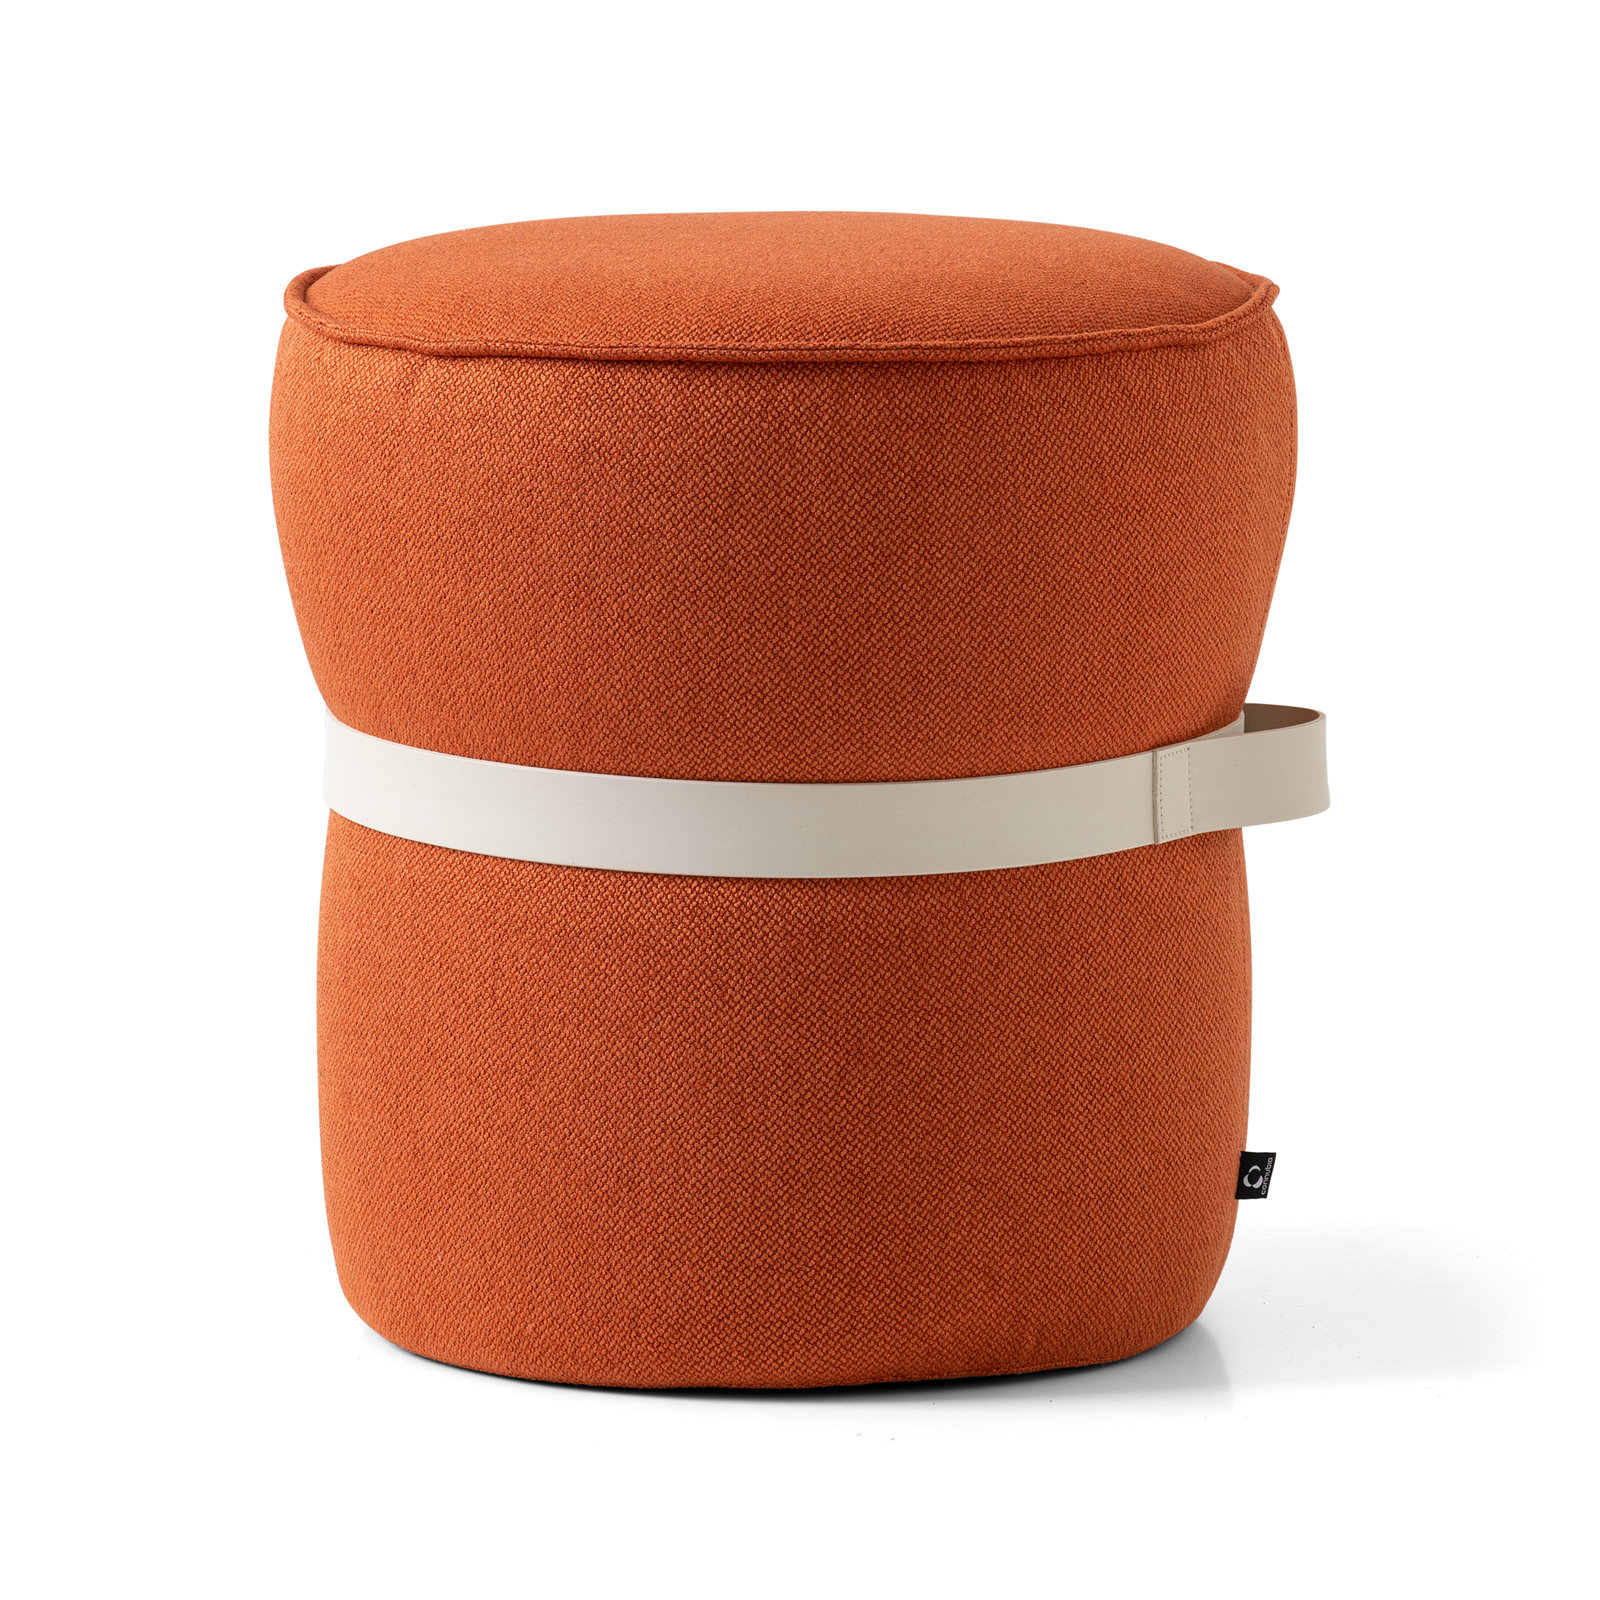 Connubia Pof Upholstered Pouf